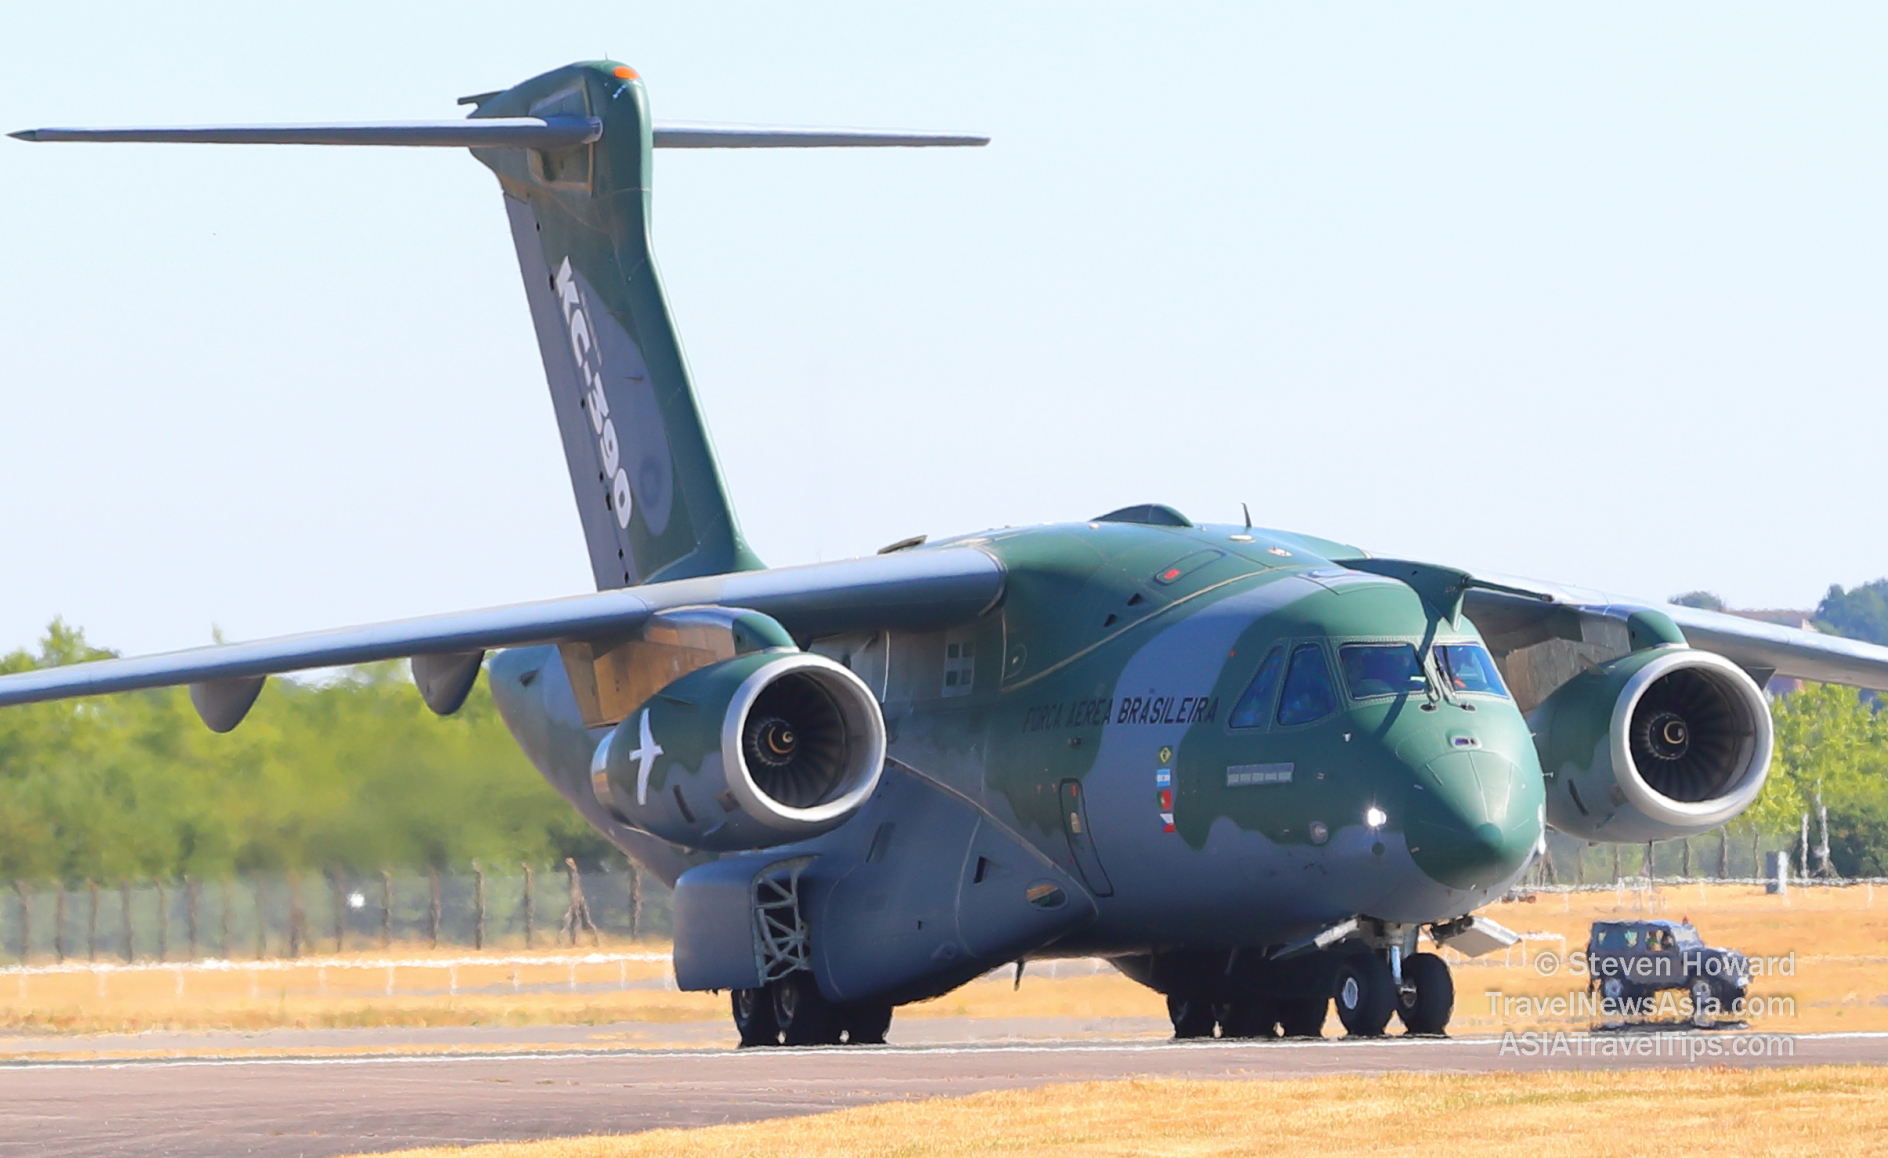 Embraer KC-390. Picture by Steven Howard of TravelNewsAsia.com Click to enlarge.